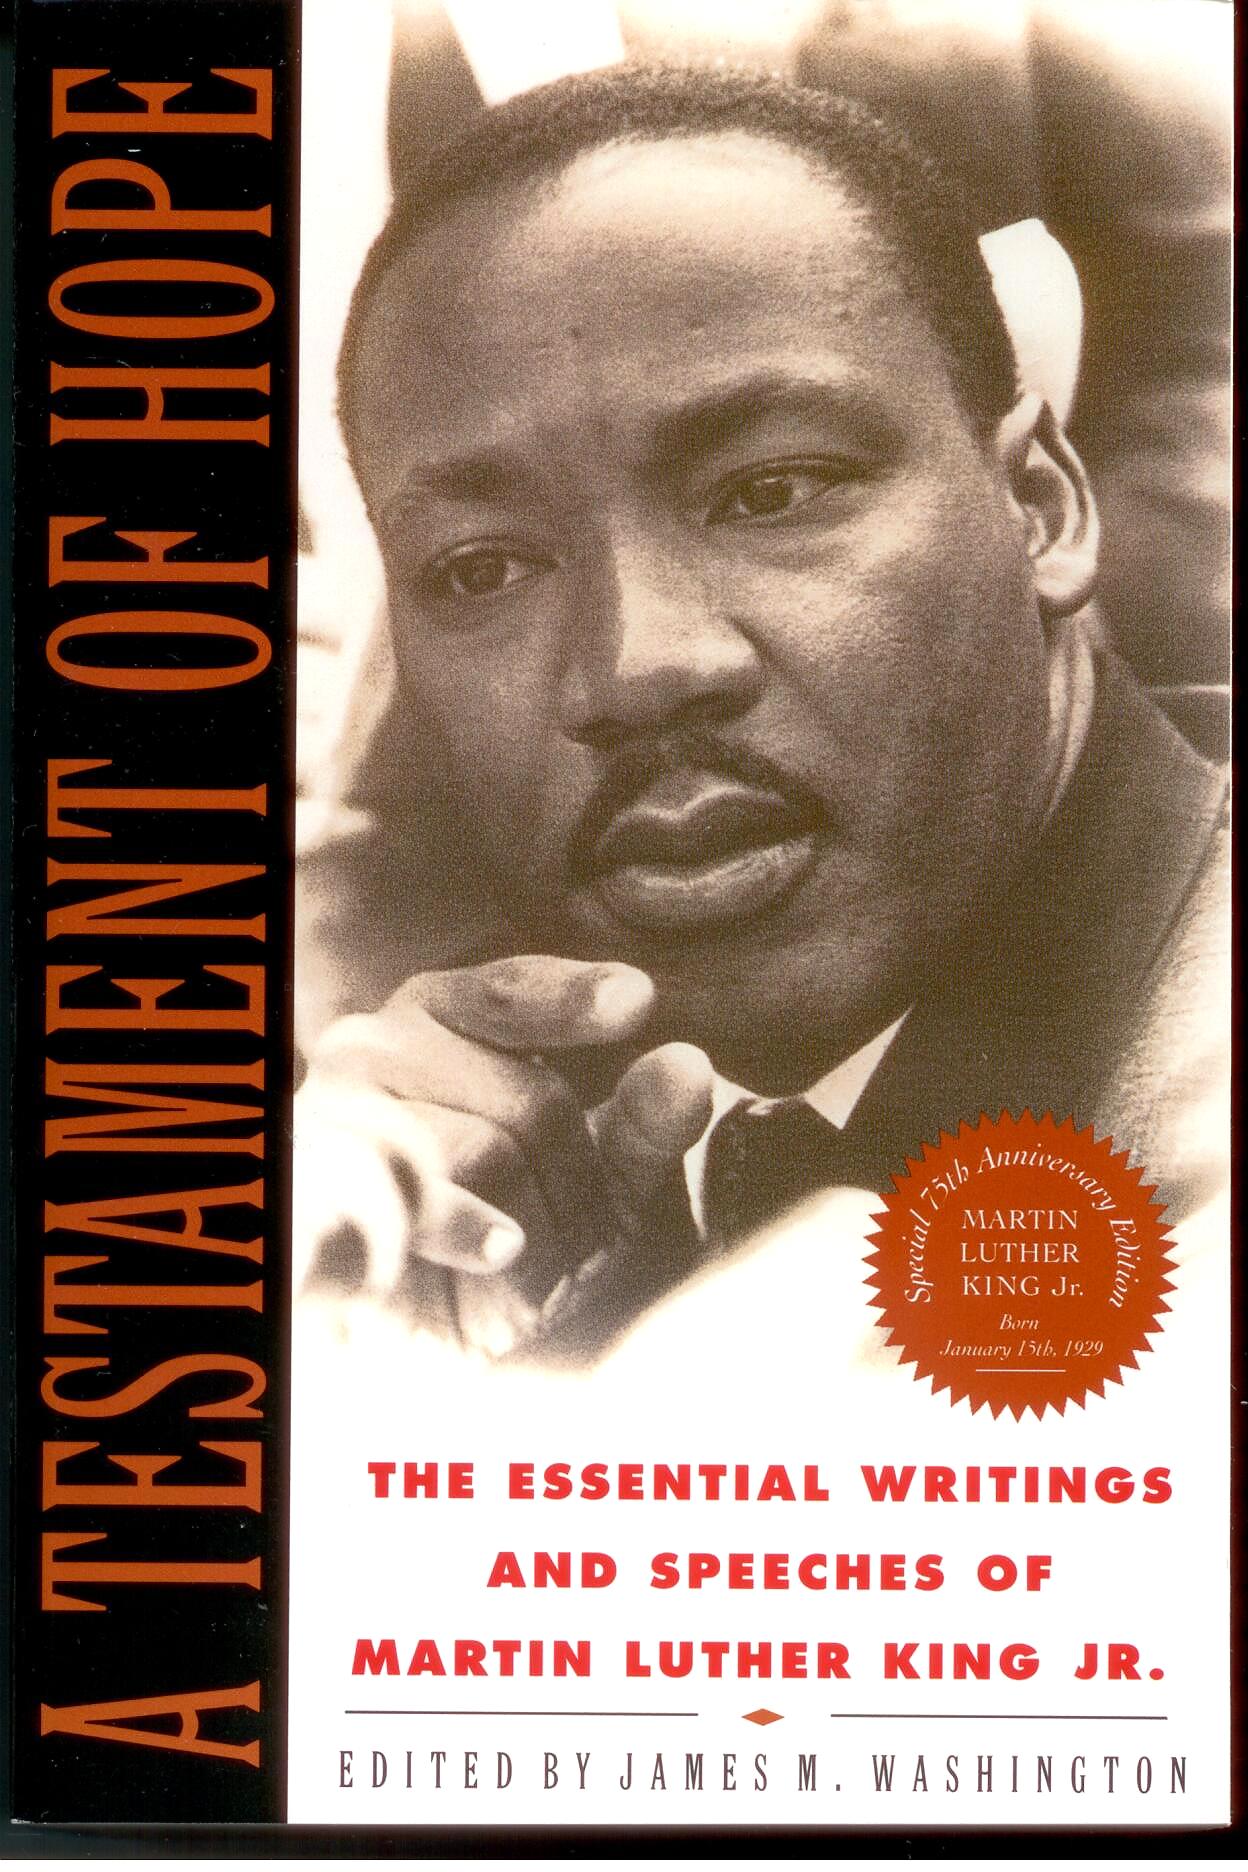 A Testament Of Hope by Martin Luther King, Jr.